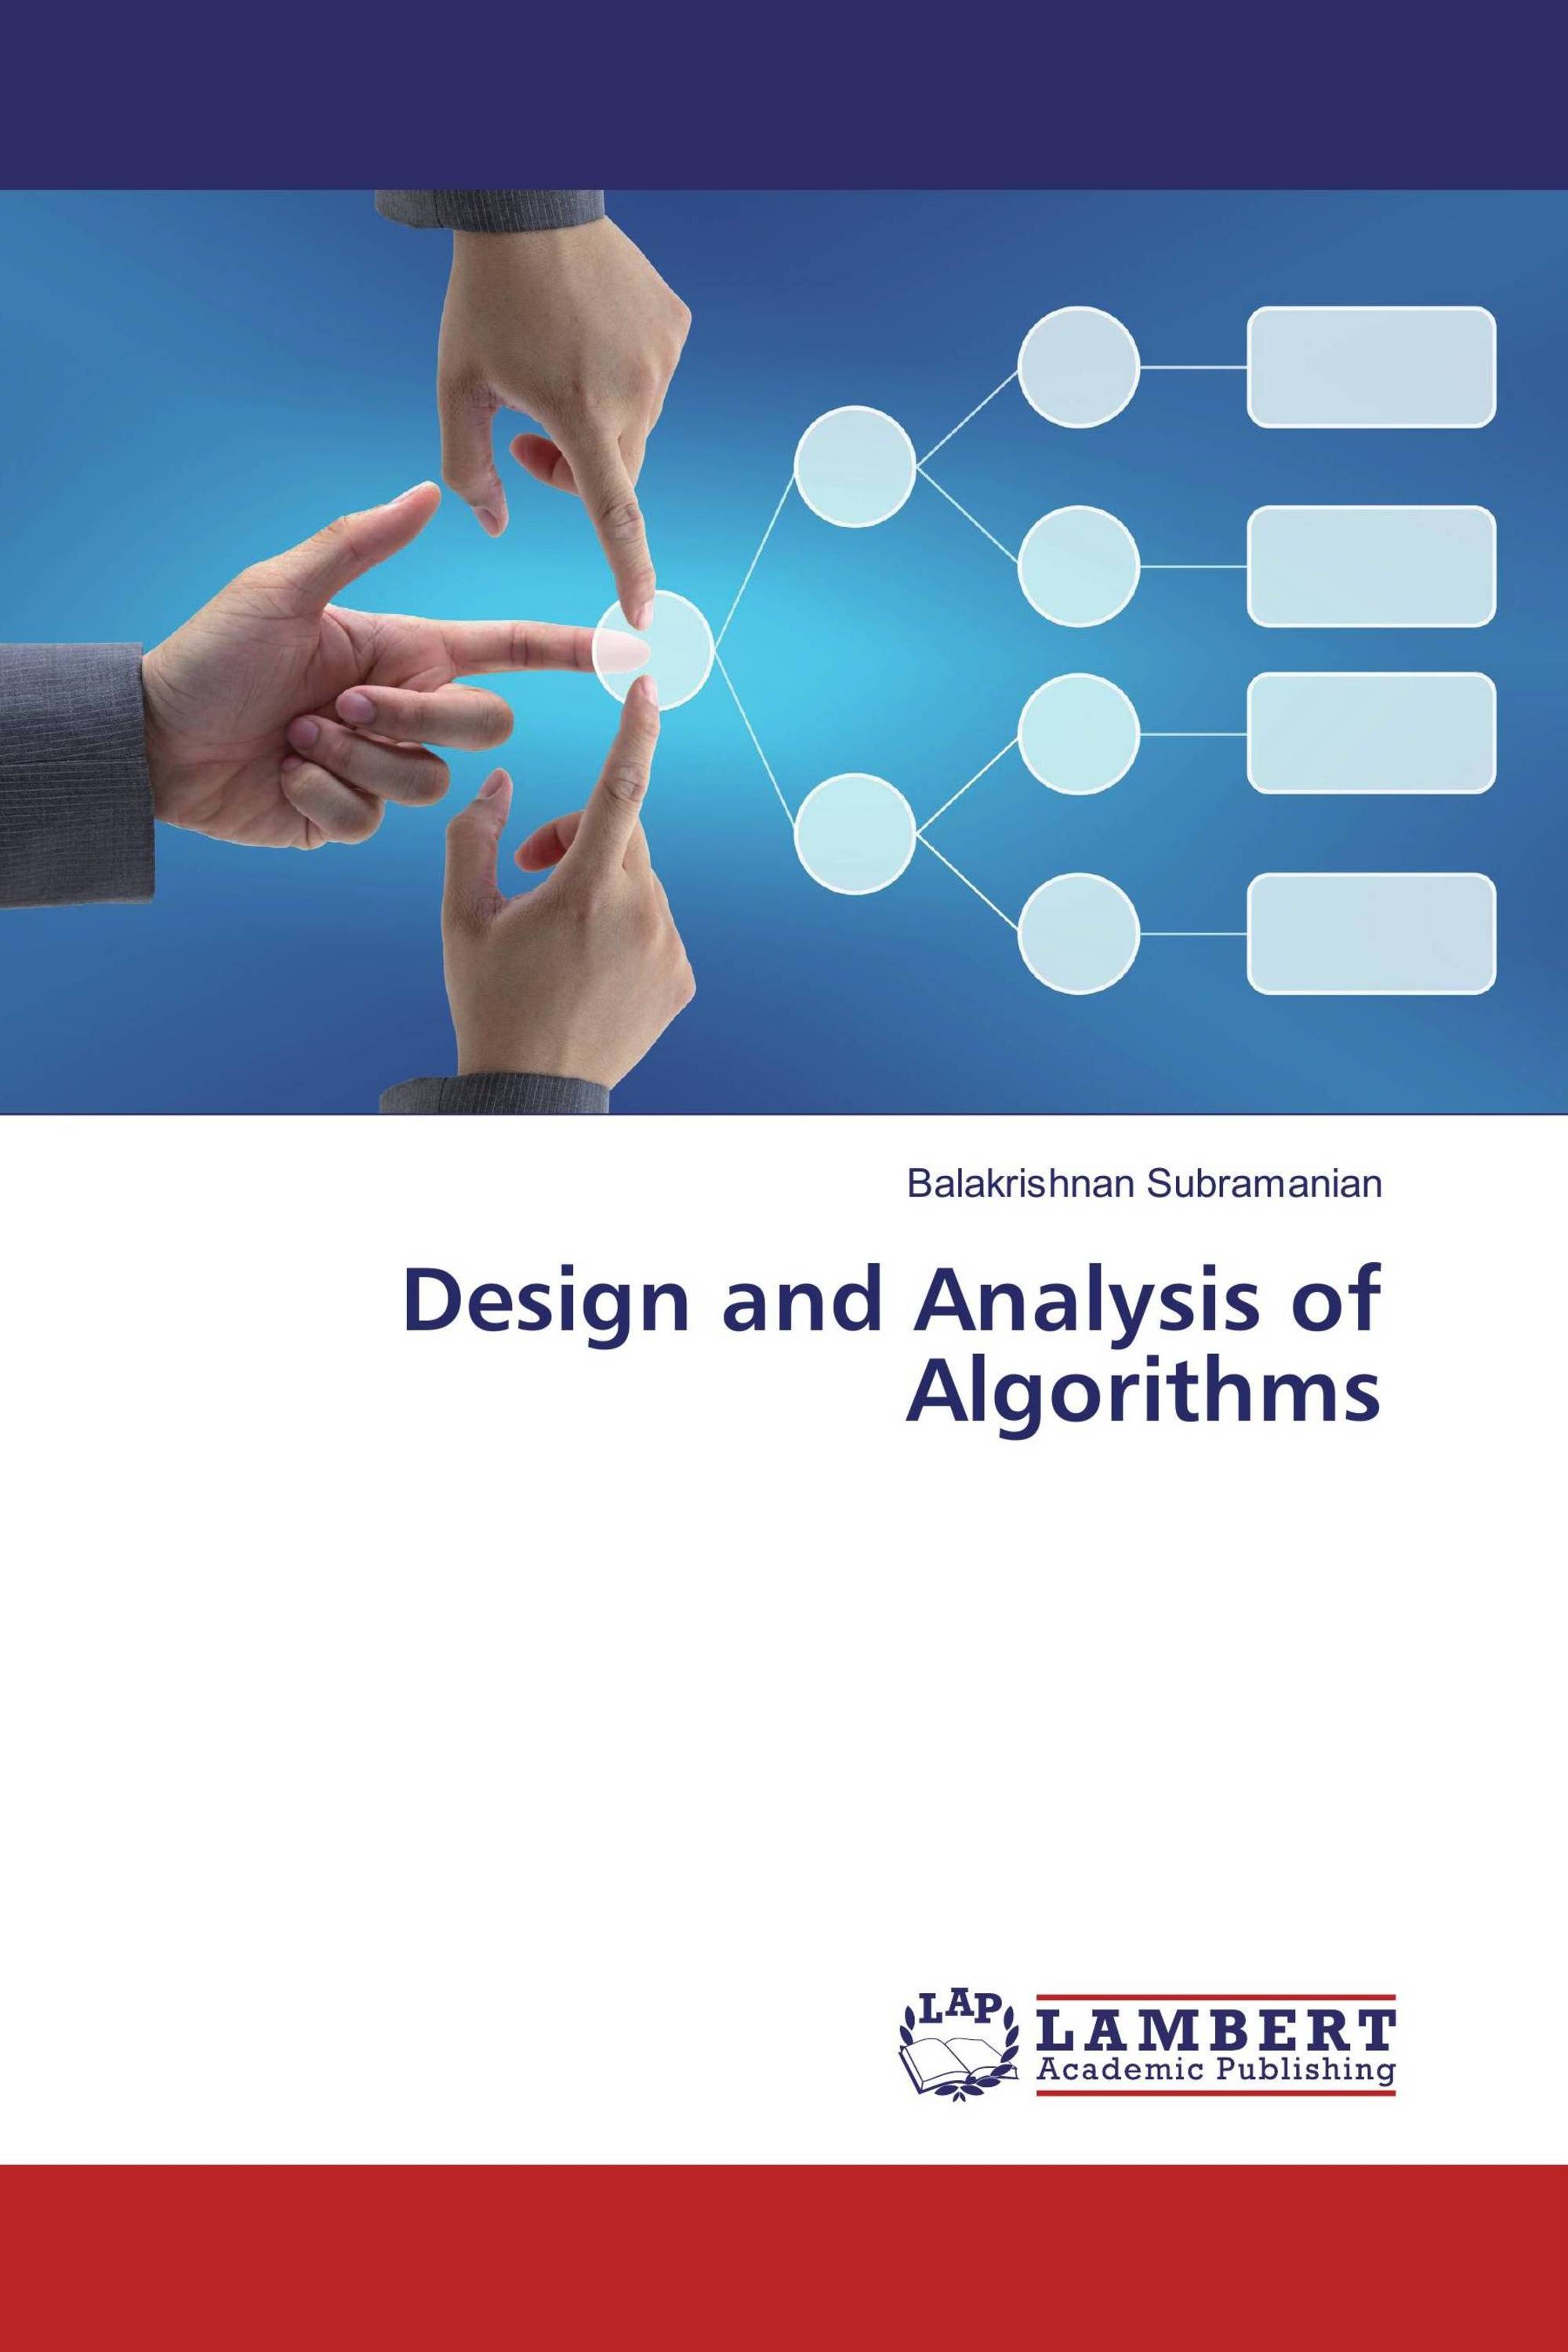 research paper on design and analysis of algorithms